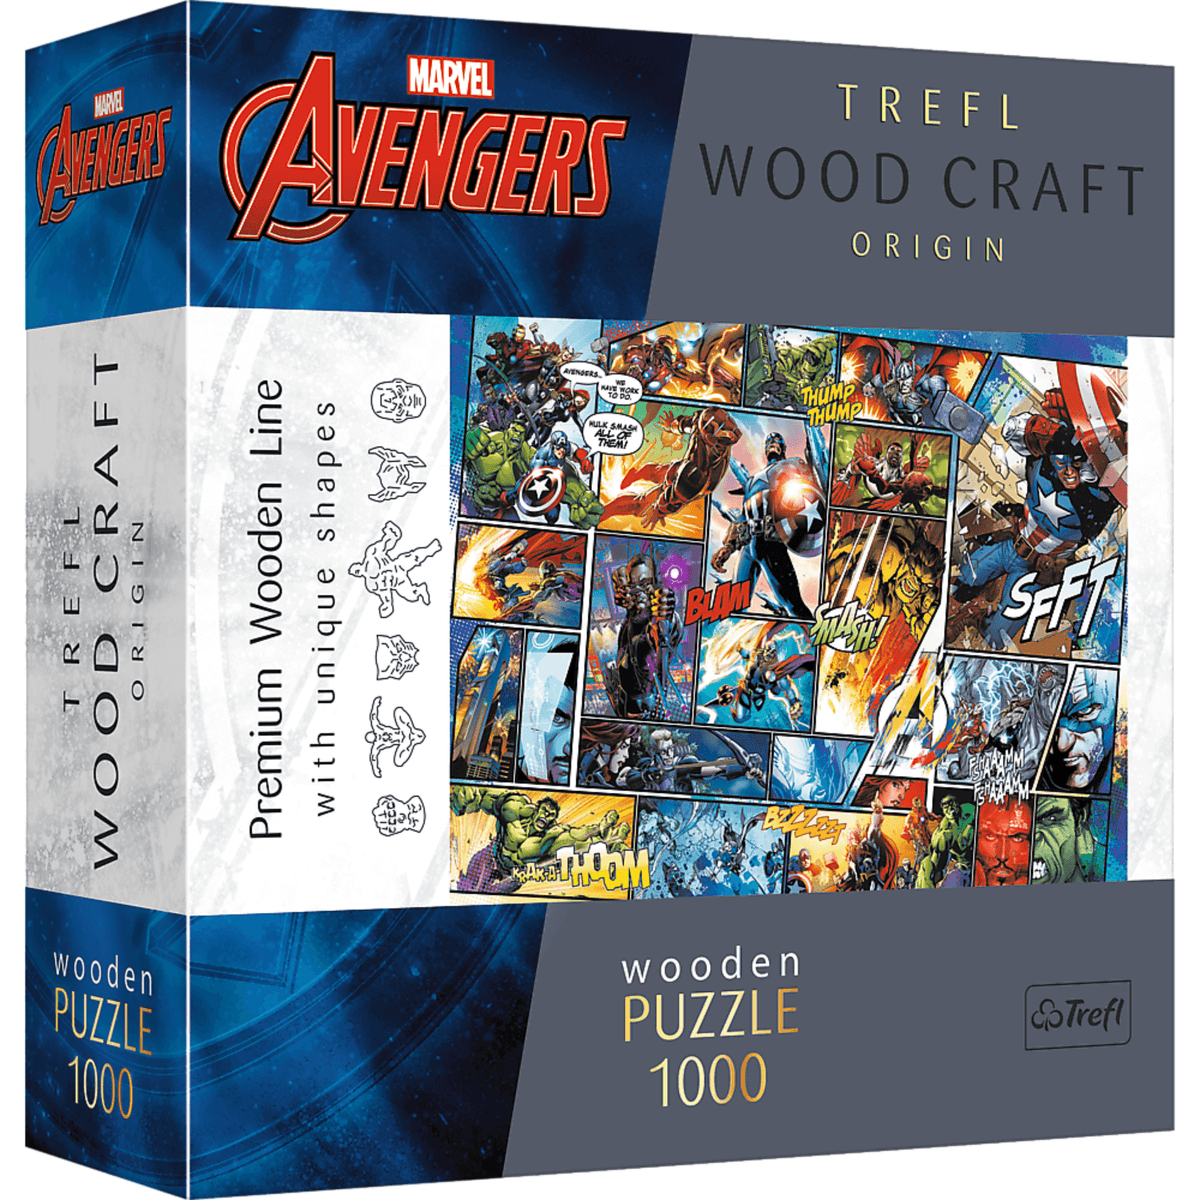 MARVEL Avengers Comic Story | Wooden Puzzle 1000 Wooden Puzzle-TREFL--.